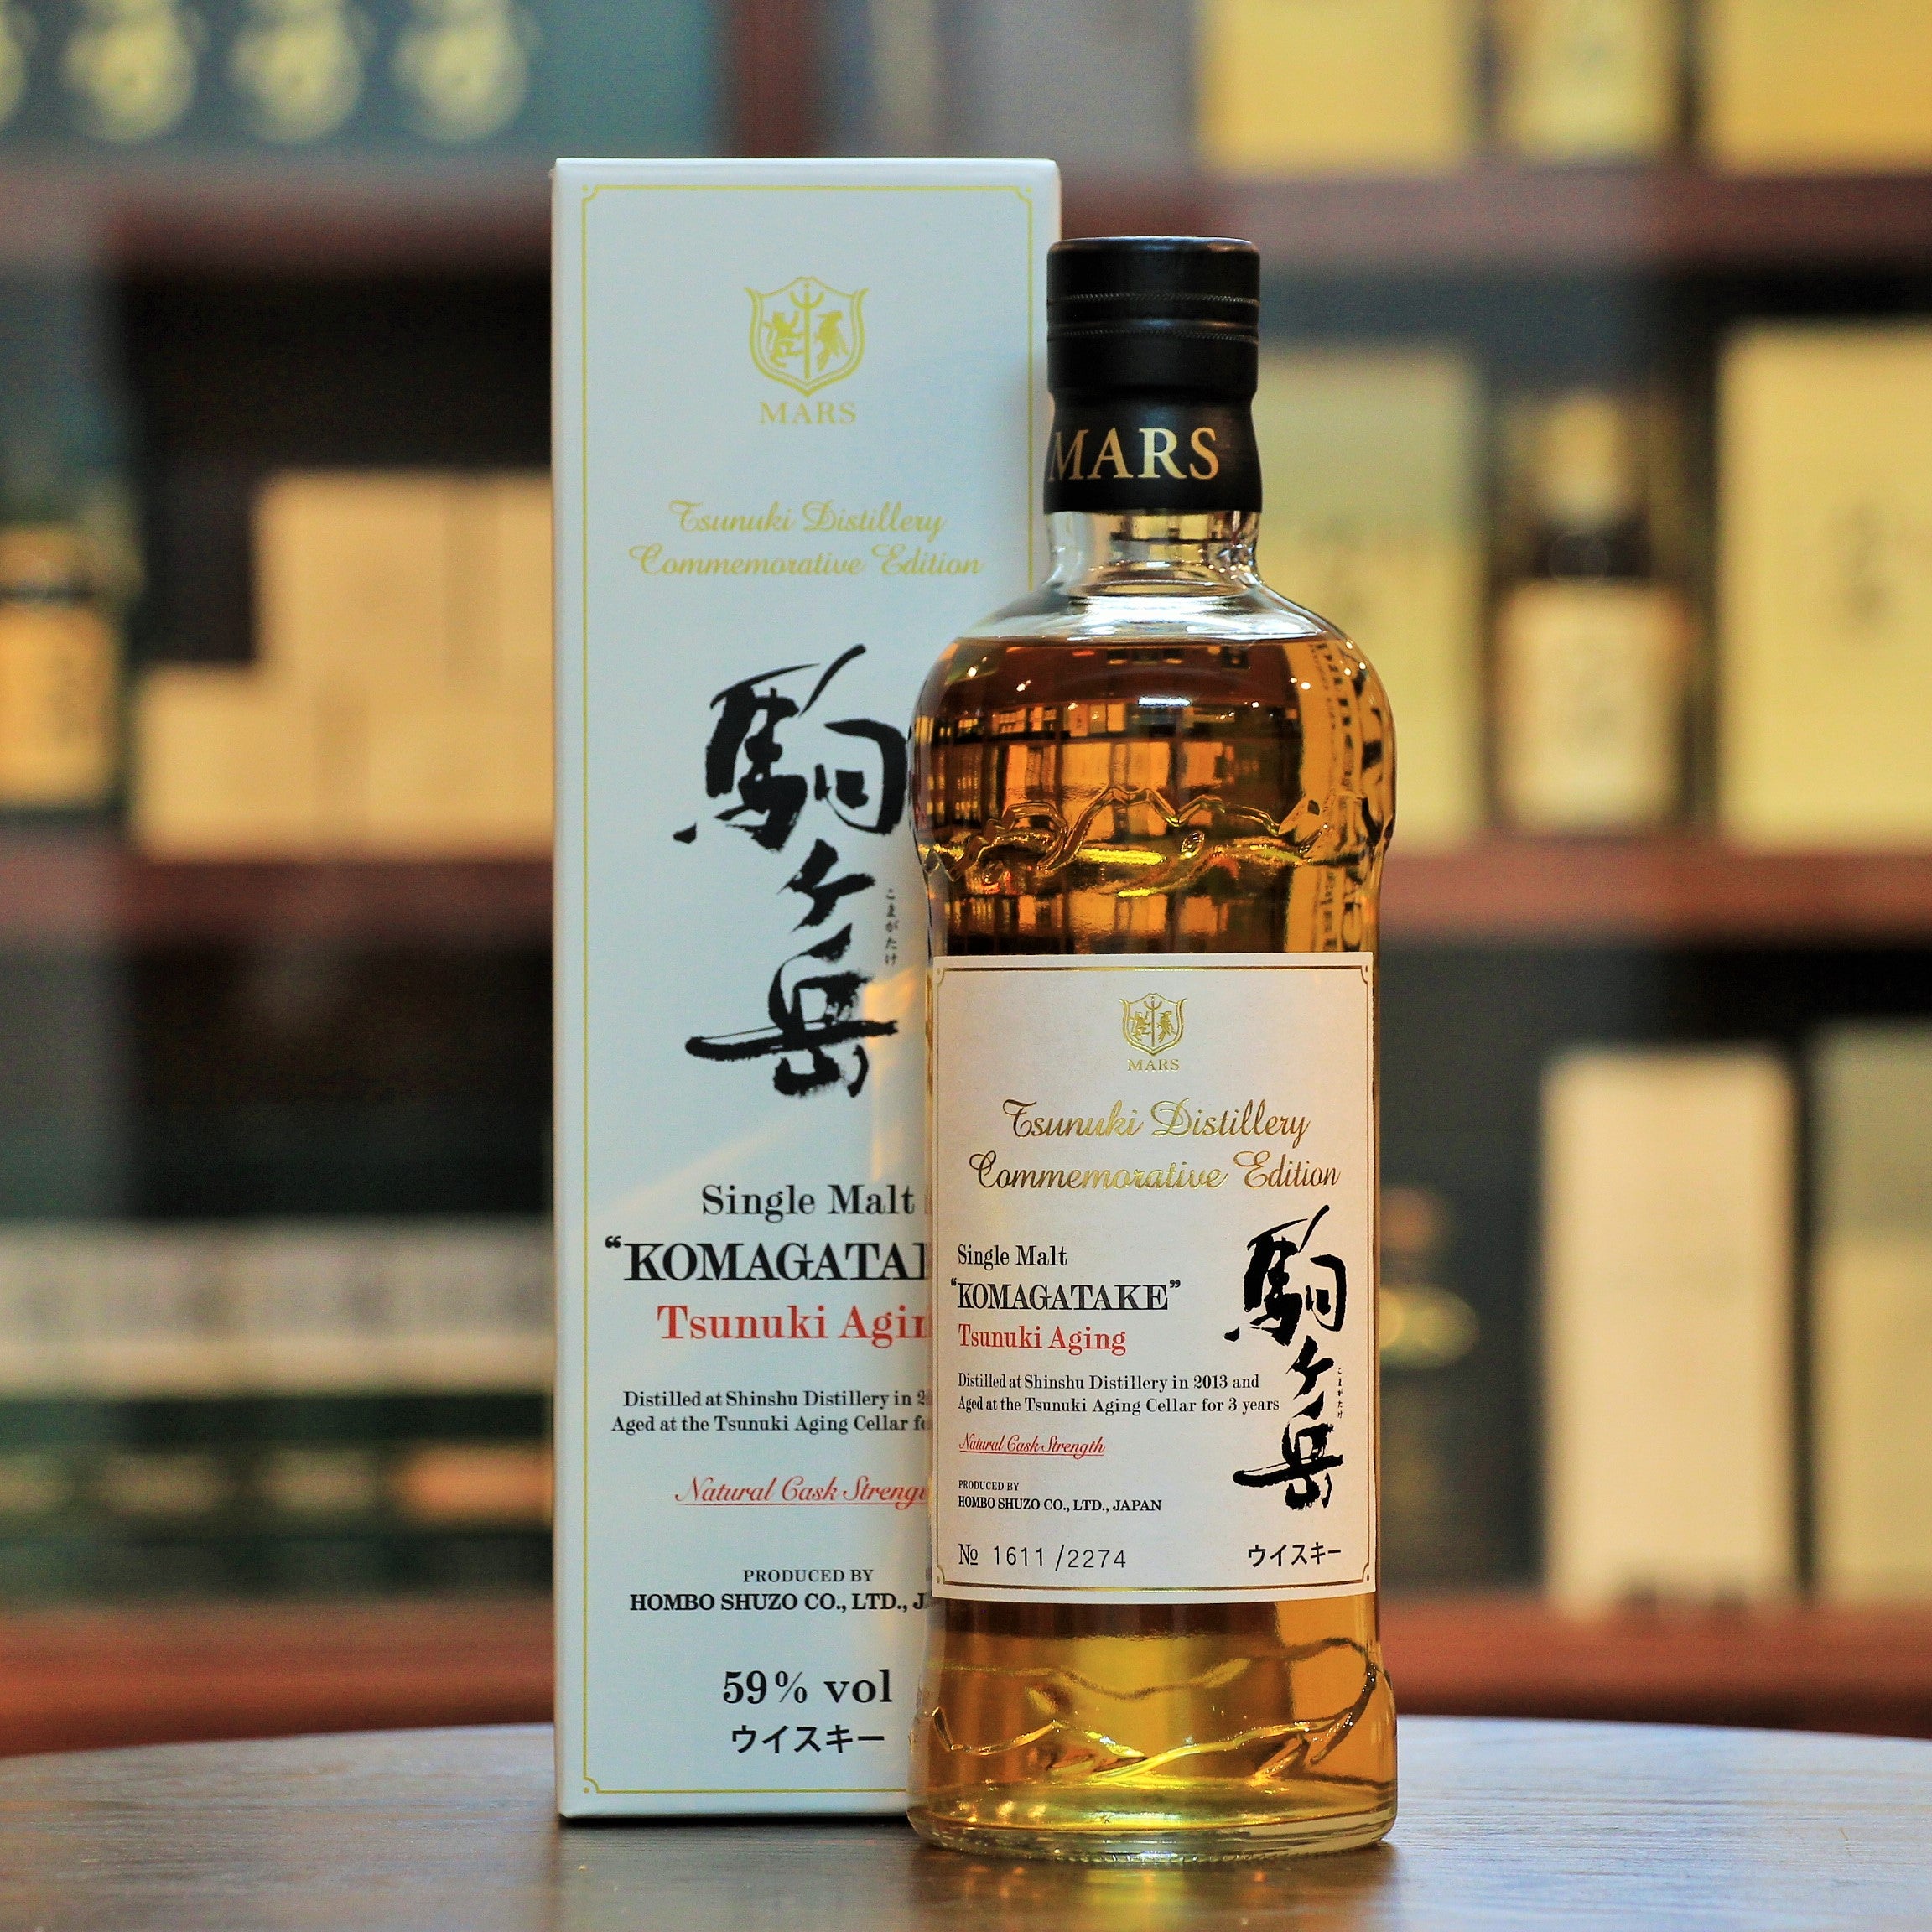 Mars Komagatake Tsunuki Aging Commemorative Edition, Vatted from 10 casks, this single malt from Shinshu was matured in the Tsunuki Aging Cellar for three years before being bottled at cask strength. 2274 bottles.